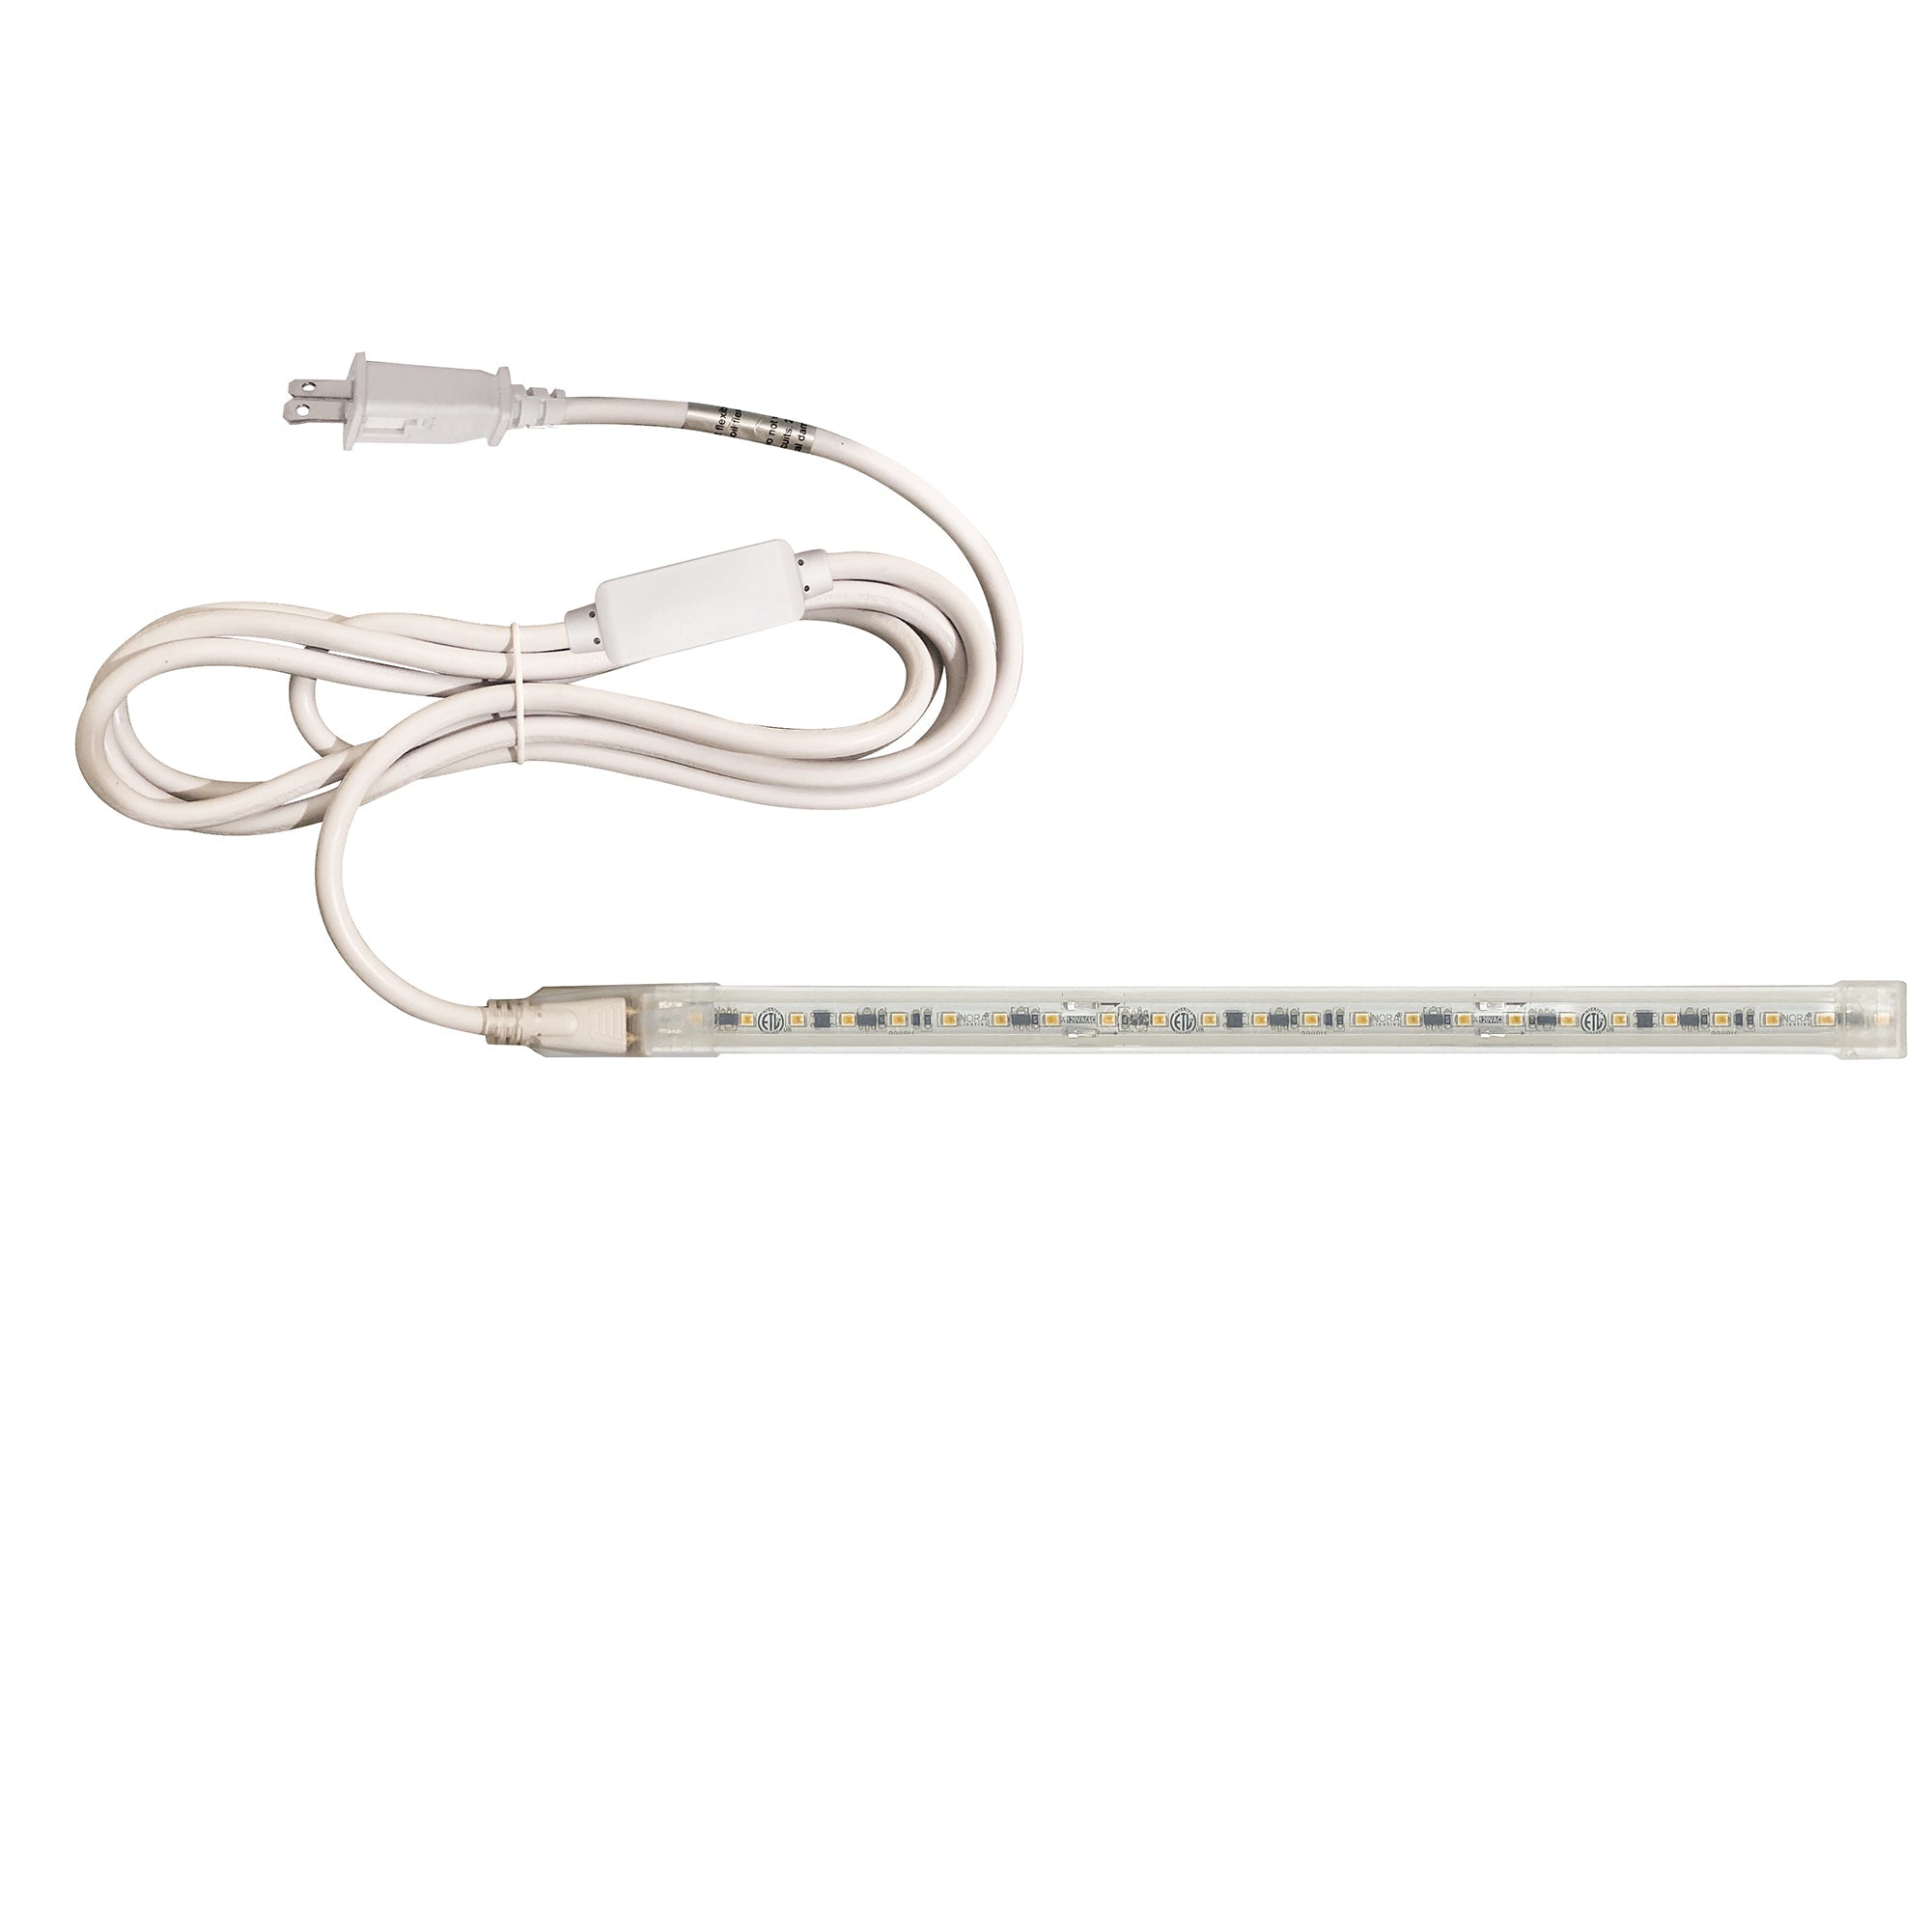 Nora Lighting NUTP13-W80-12-940/CPSP - Accent / Undercabinet - Custom Cut 80-ft 120V Continuous LED Tape Light, 330lm / 3.6W per foot, 4000K, w/ Mounting Clips and 8' Cord & Plug w/ Surge Protector